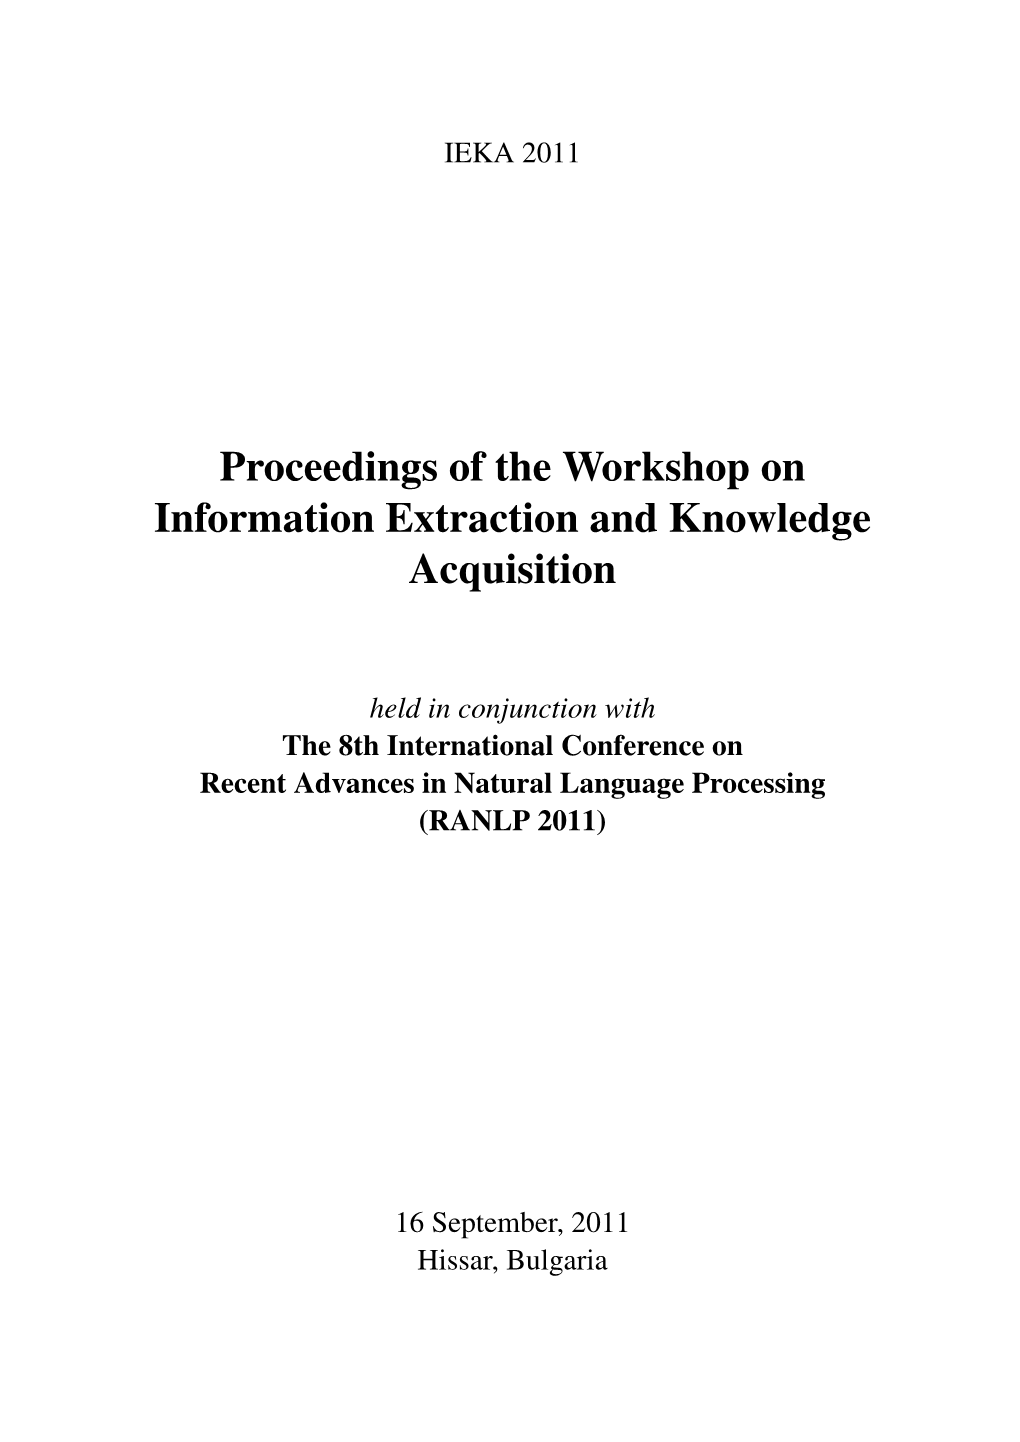 Workshop on Information Extraction and Knowledge Acquisition 2011